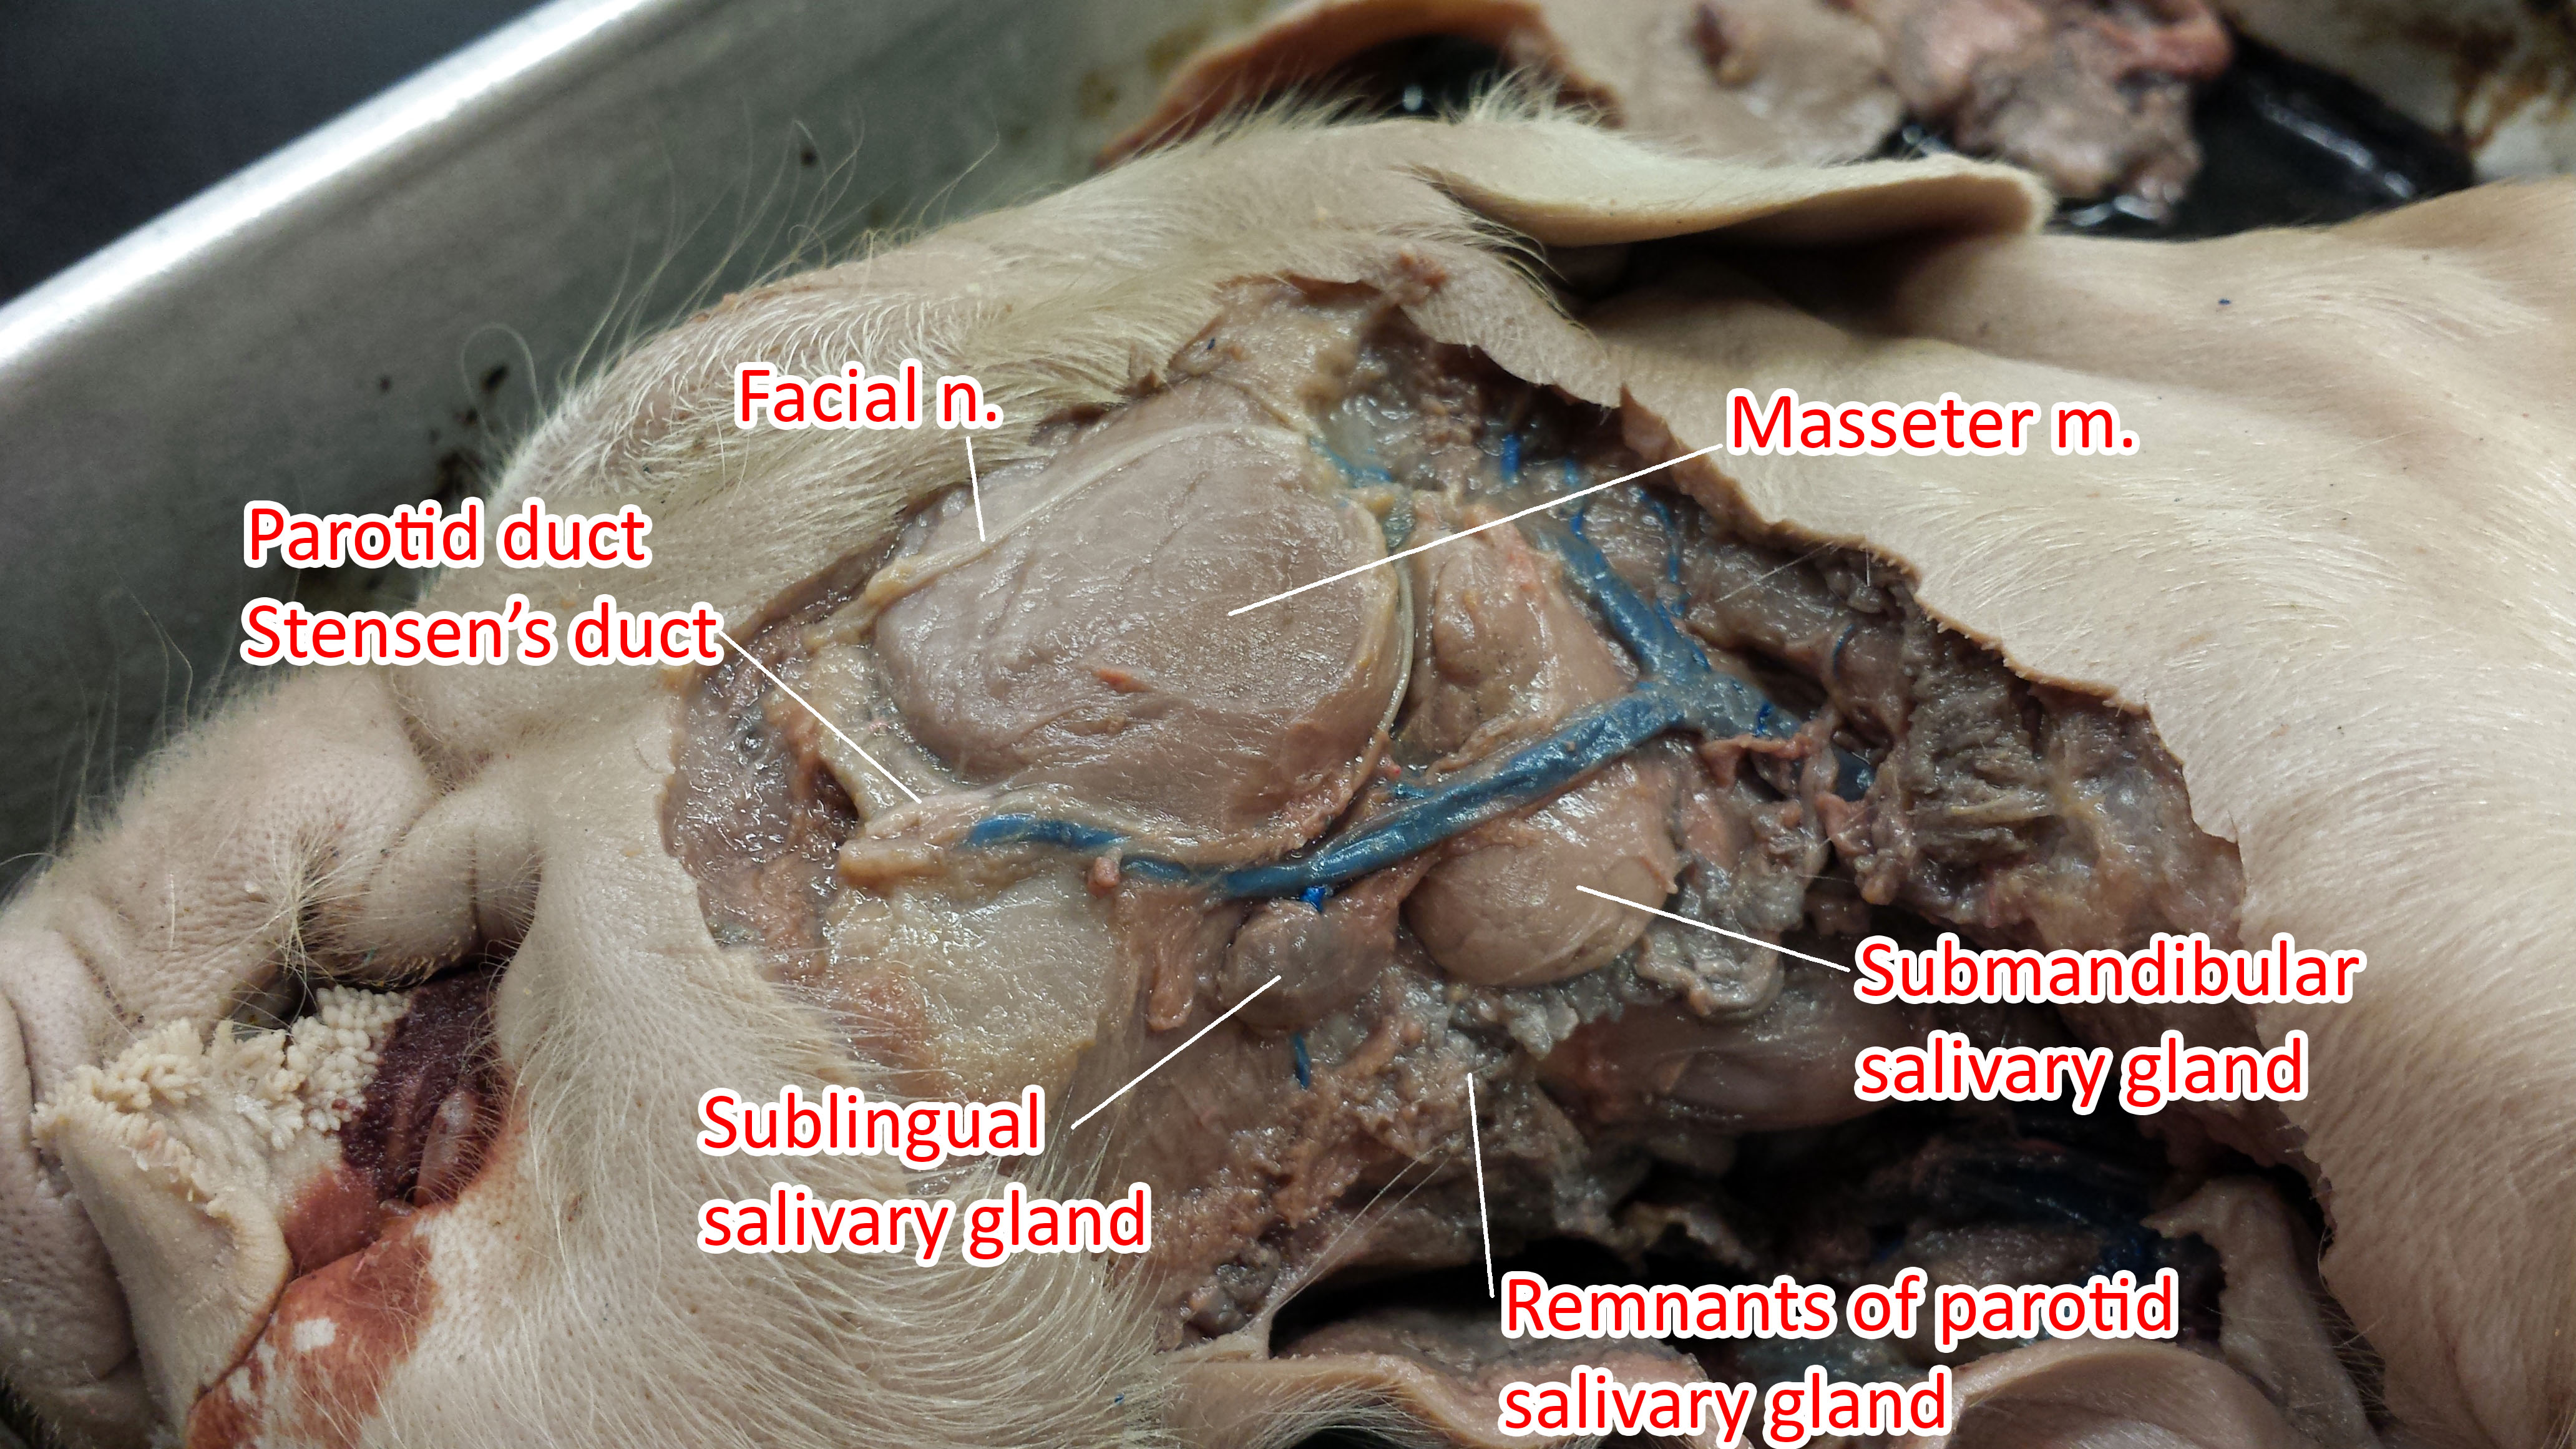 Photos of The Pig Digestive System